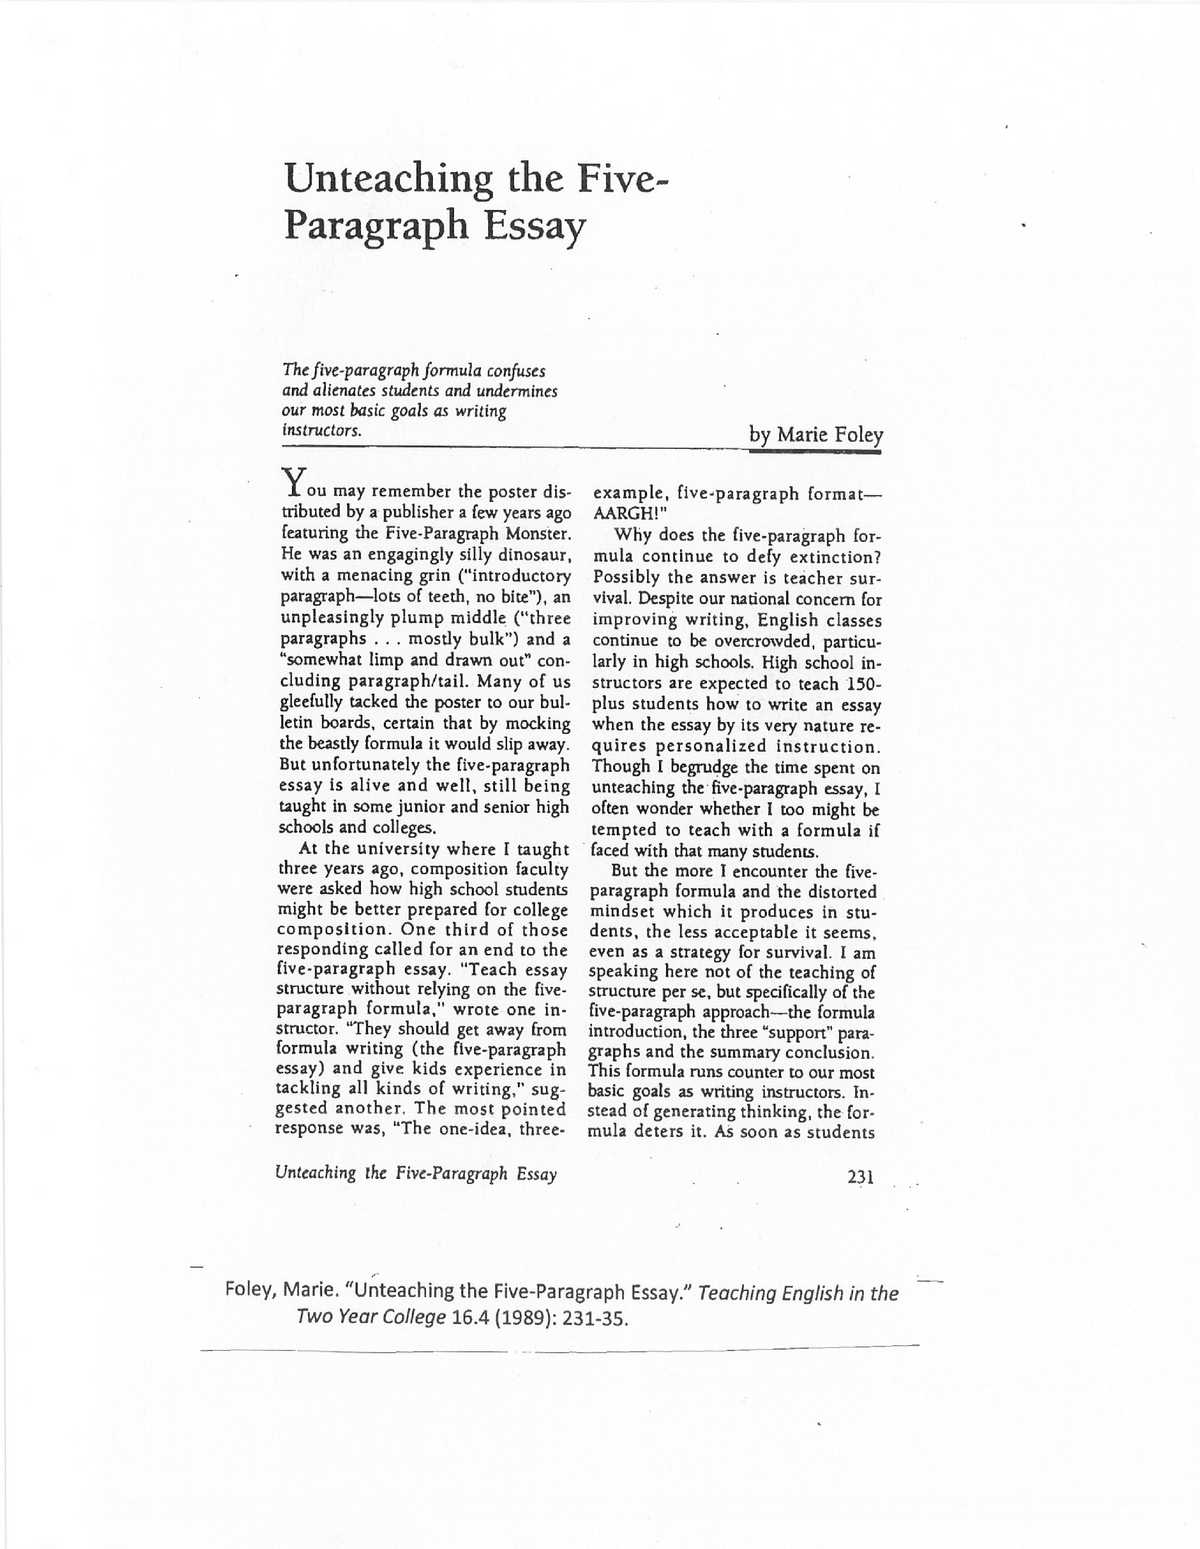 unteaching the five paragraph essay by marie foley